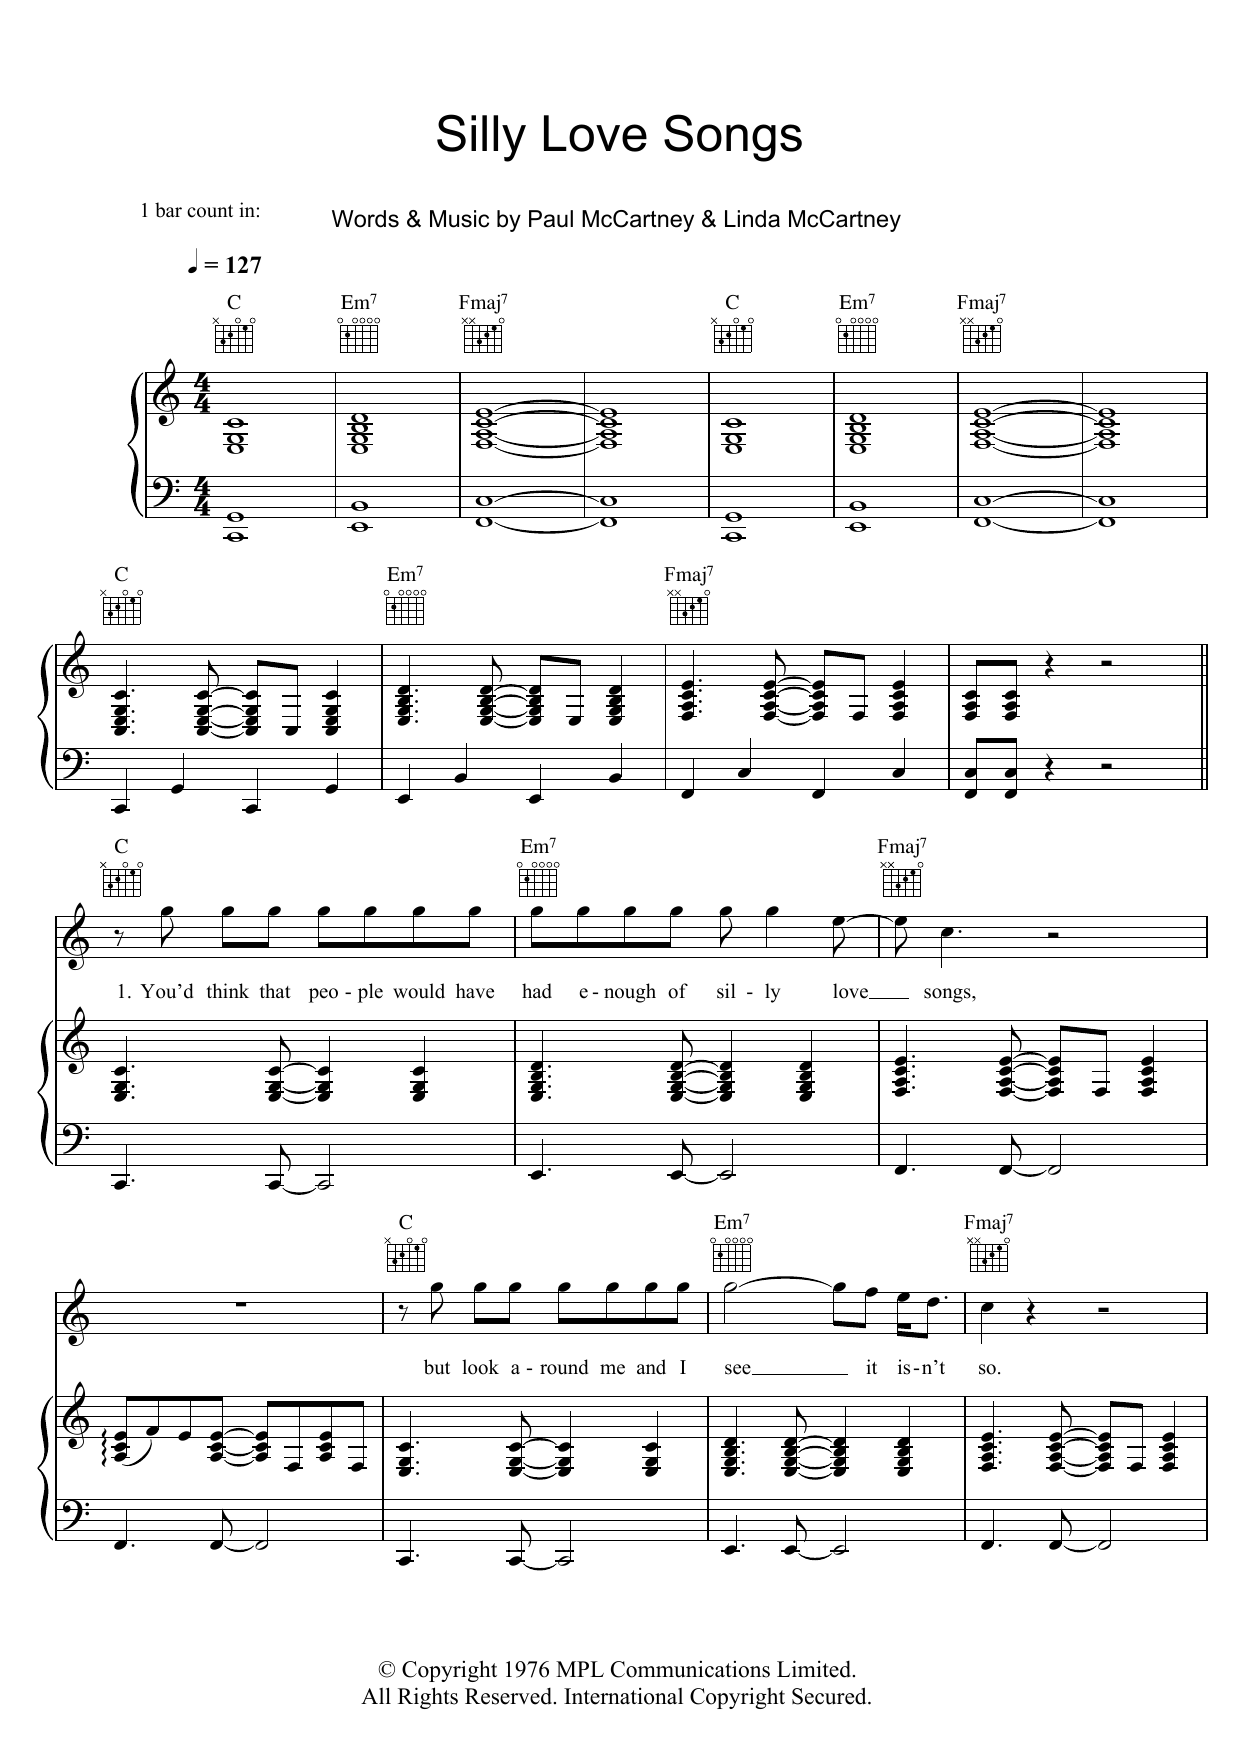 Wings Silly Love Songs sheet music notes and chords. Download Printable PDF.